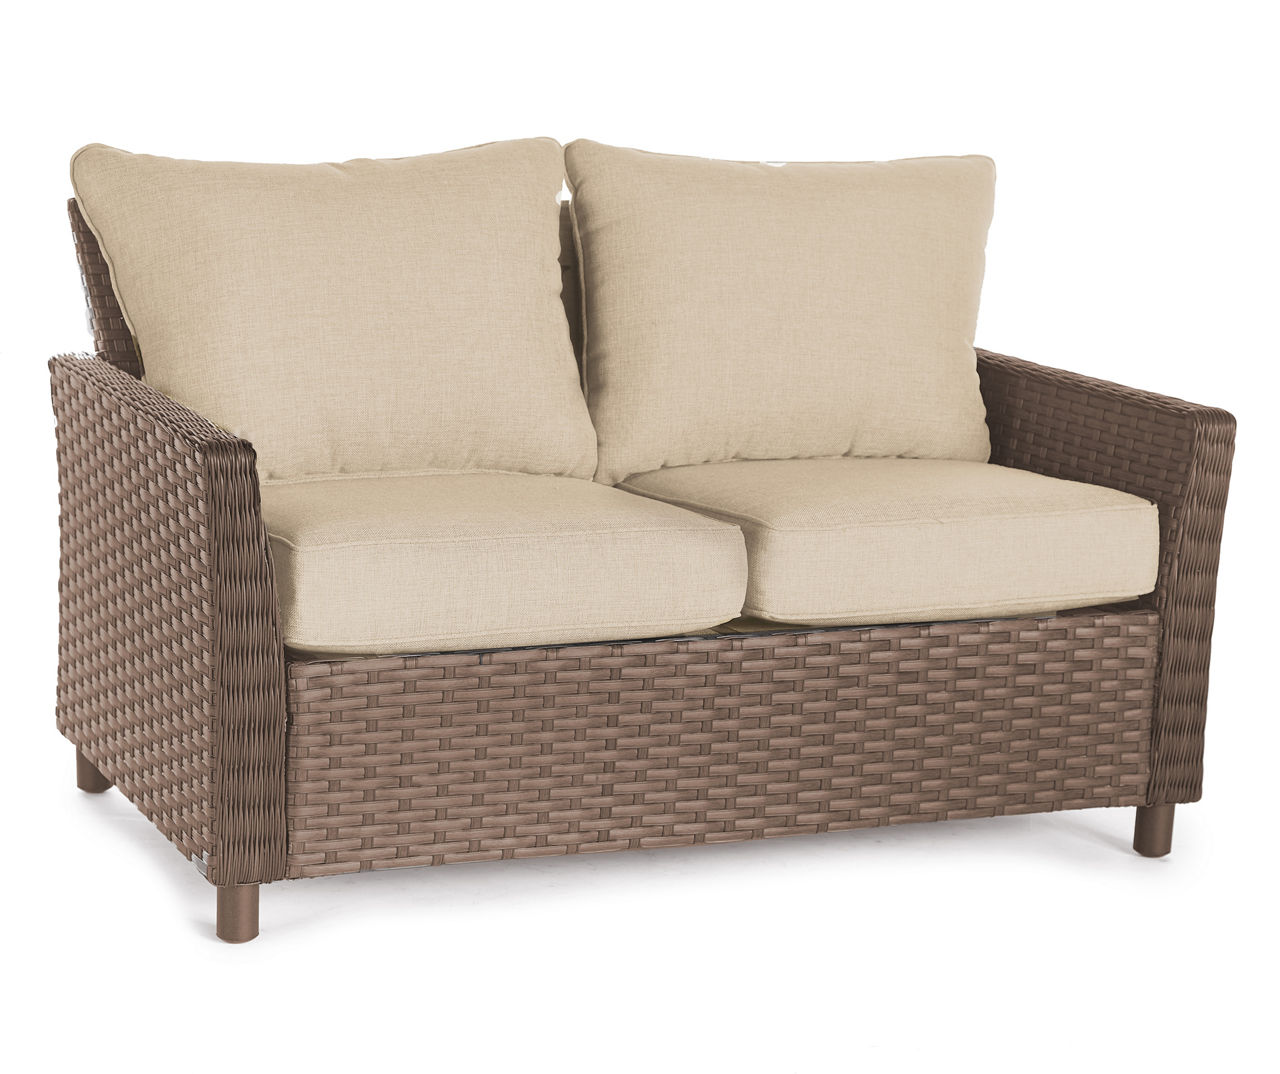 Autumn Cove Tan All-Weather Wicker Cushioned Patio Loveseat